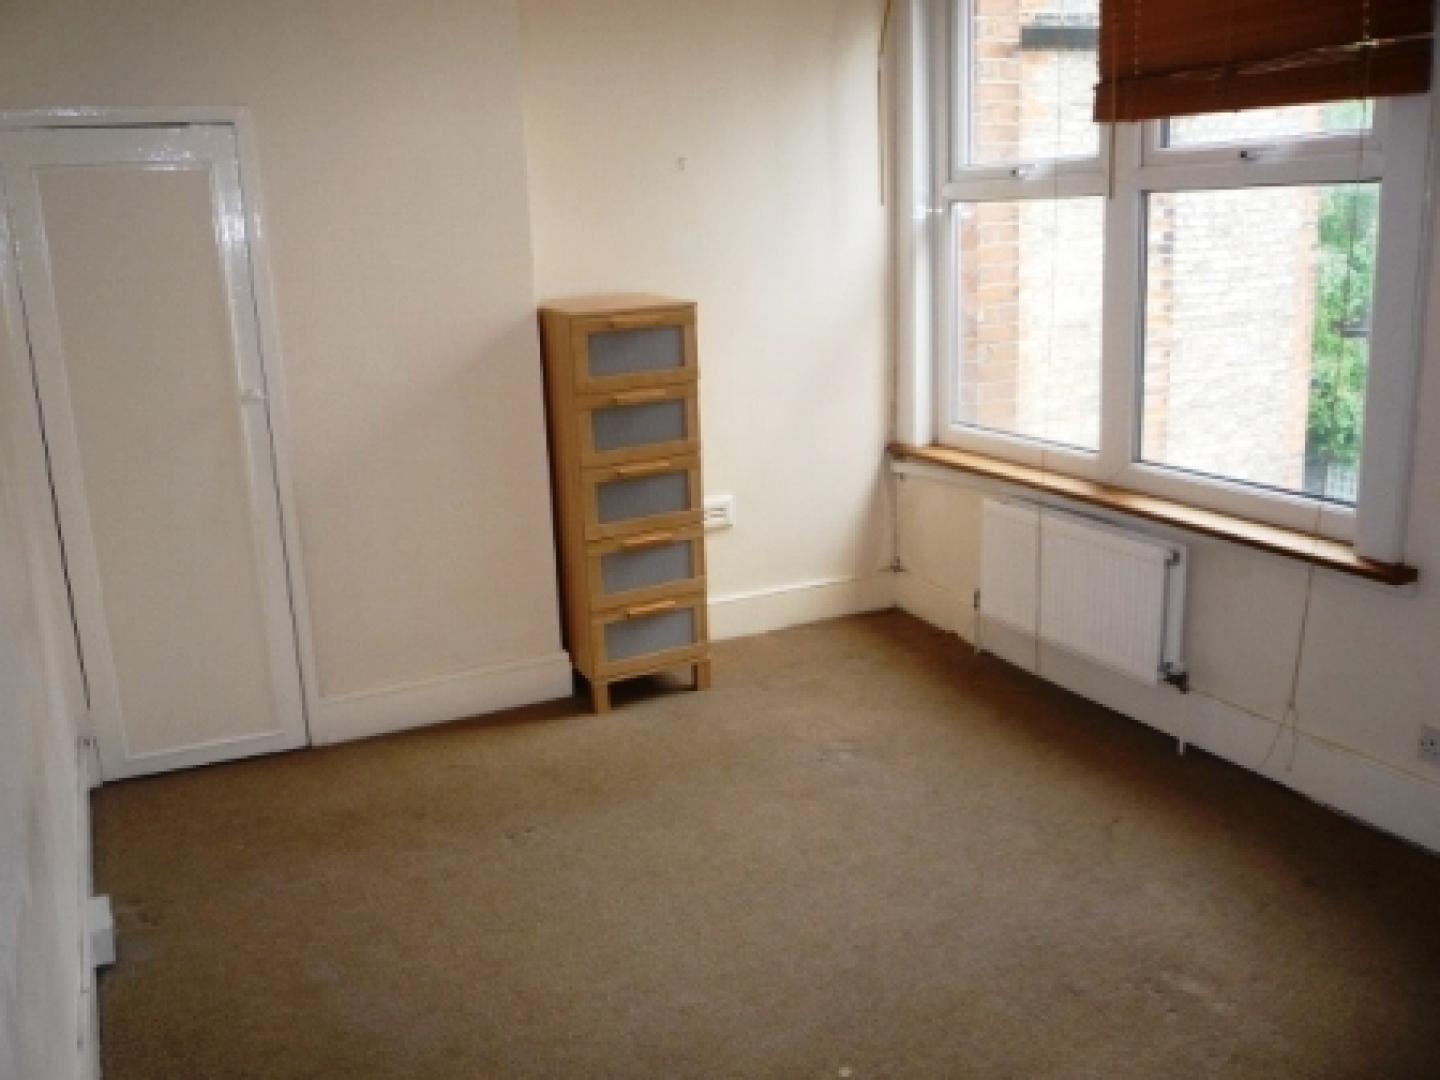 			HEART OF CROUCH END!, 1 Bedroom, 1 bath, 1 reception Flat			 Elder Avenue, CROUCH END